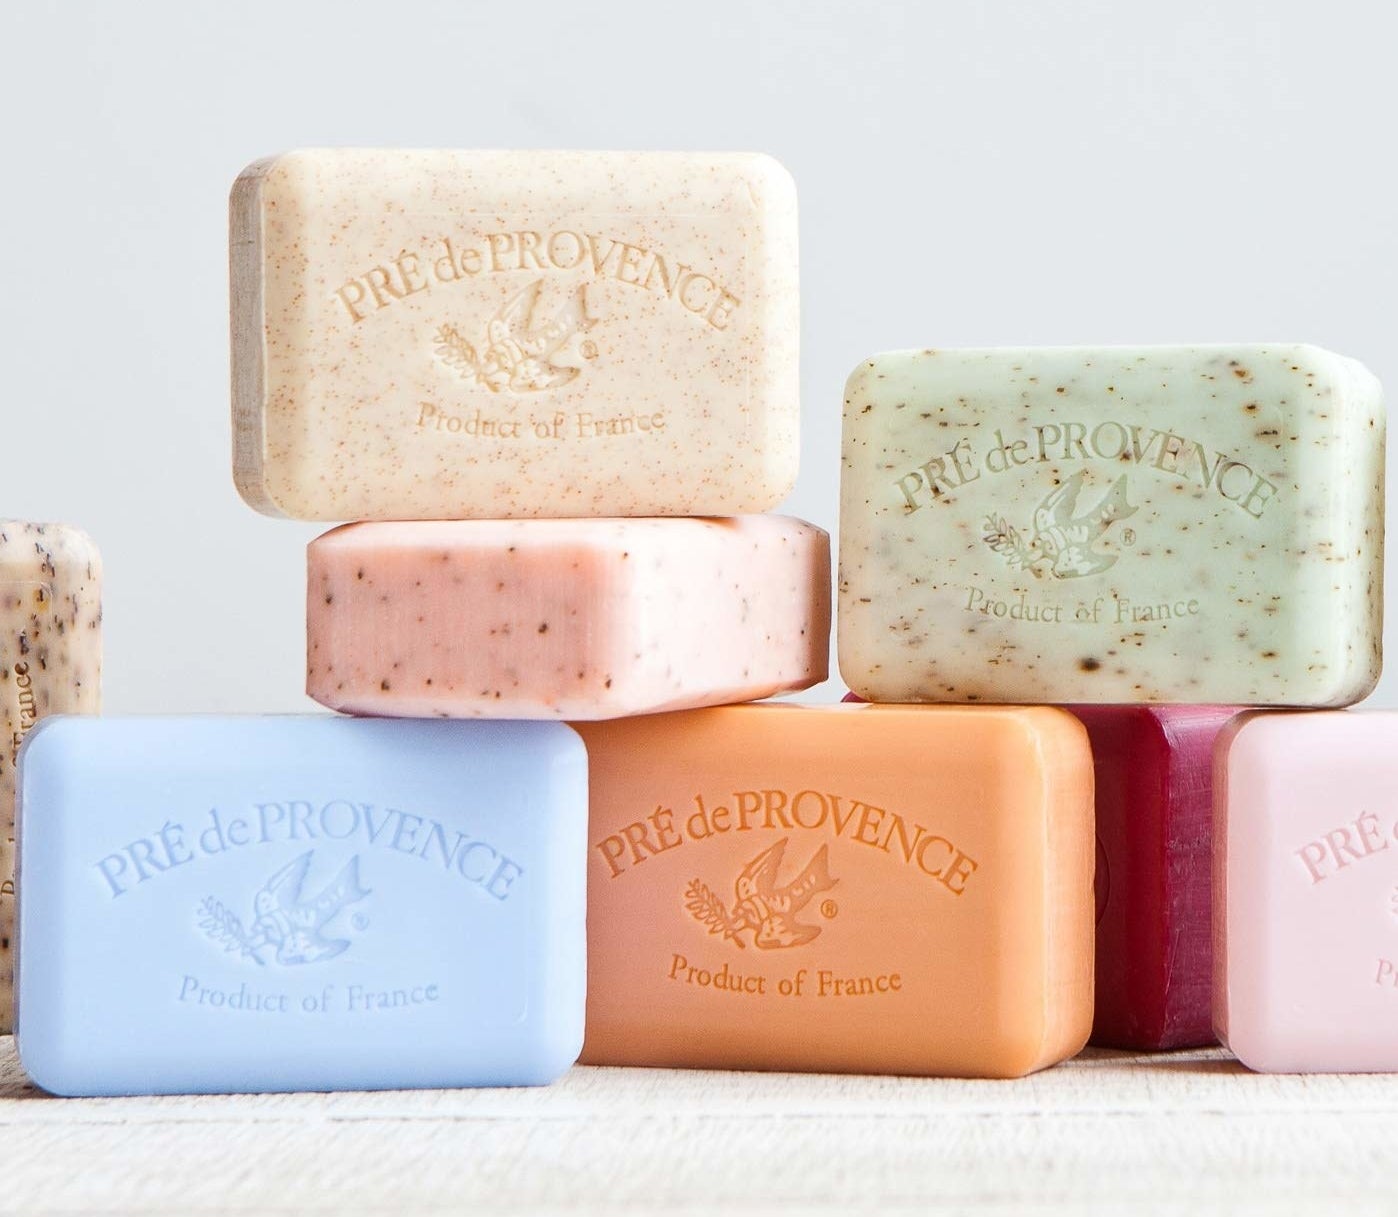 A stack of the colorful soaps engraved with a bird and &quot;Pre de Provence product of France&quot; logo